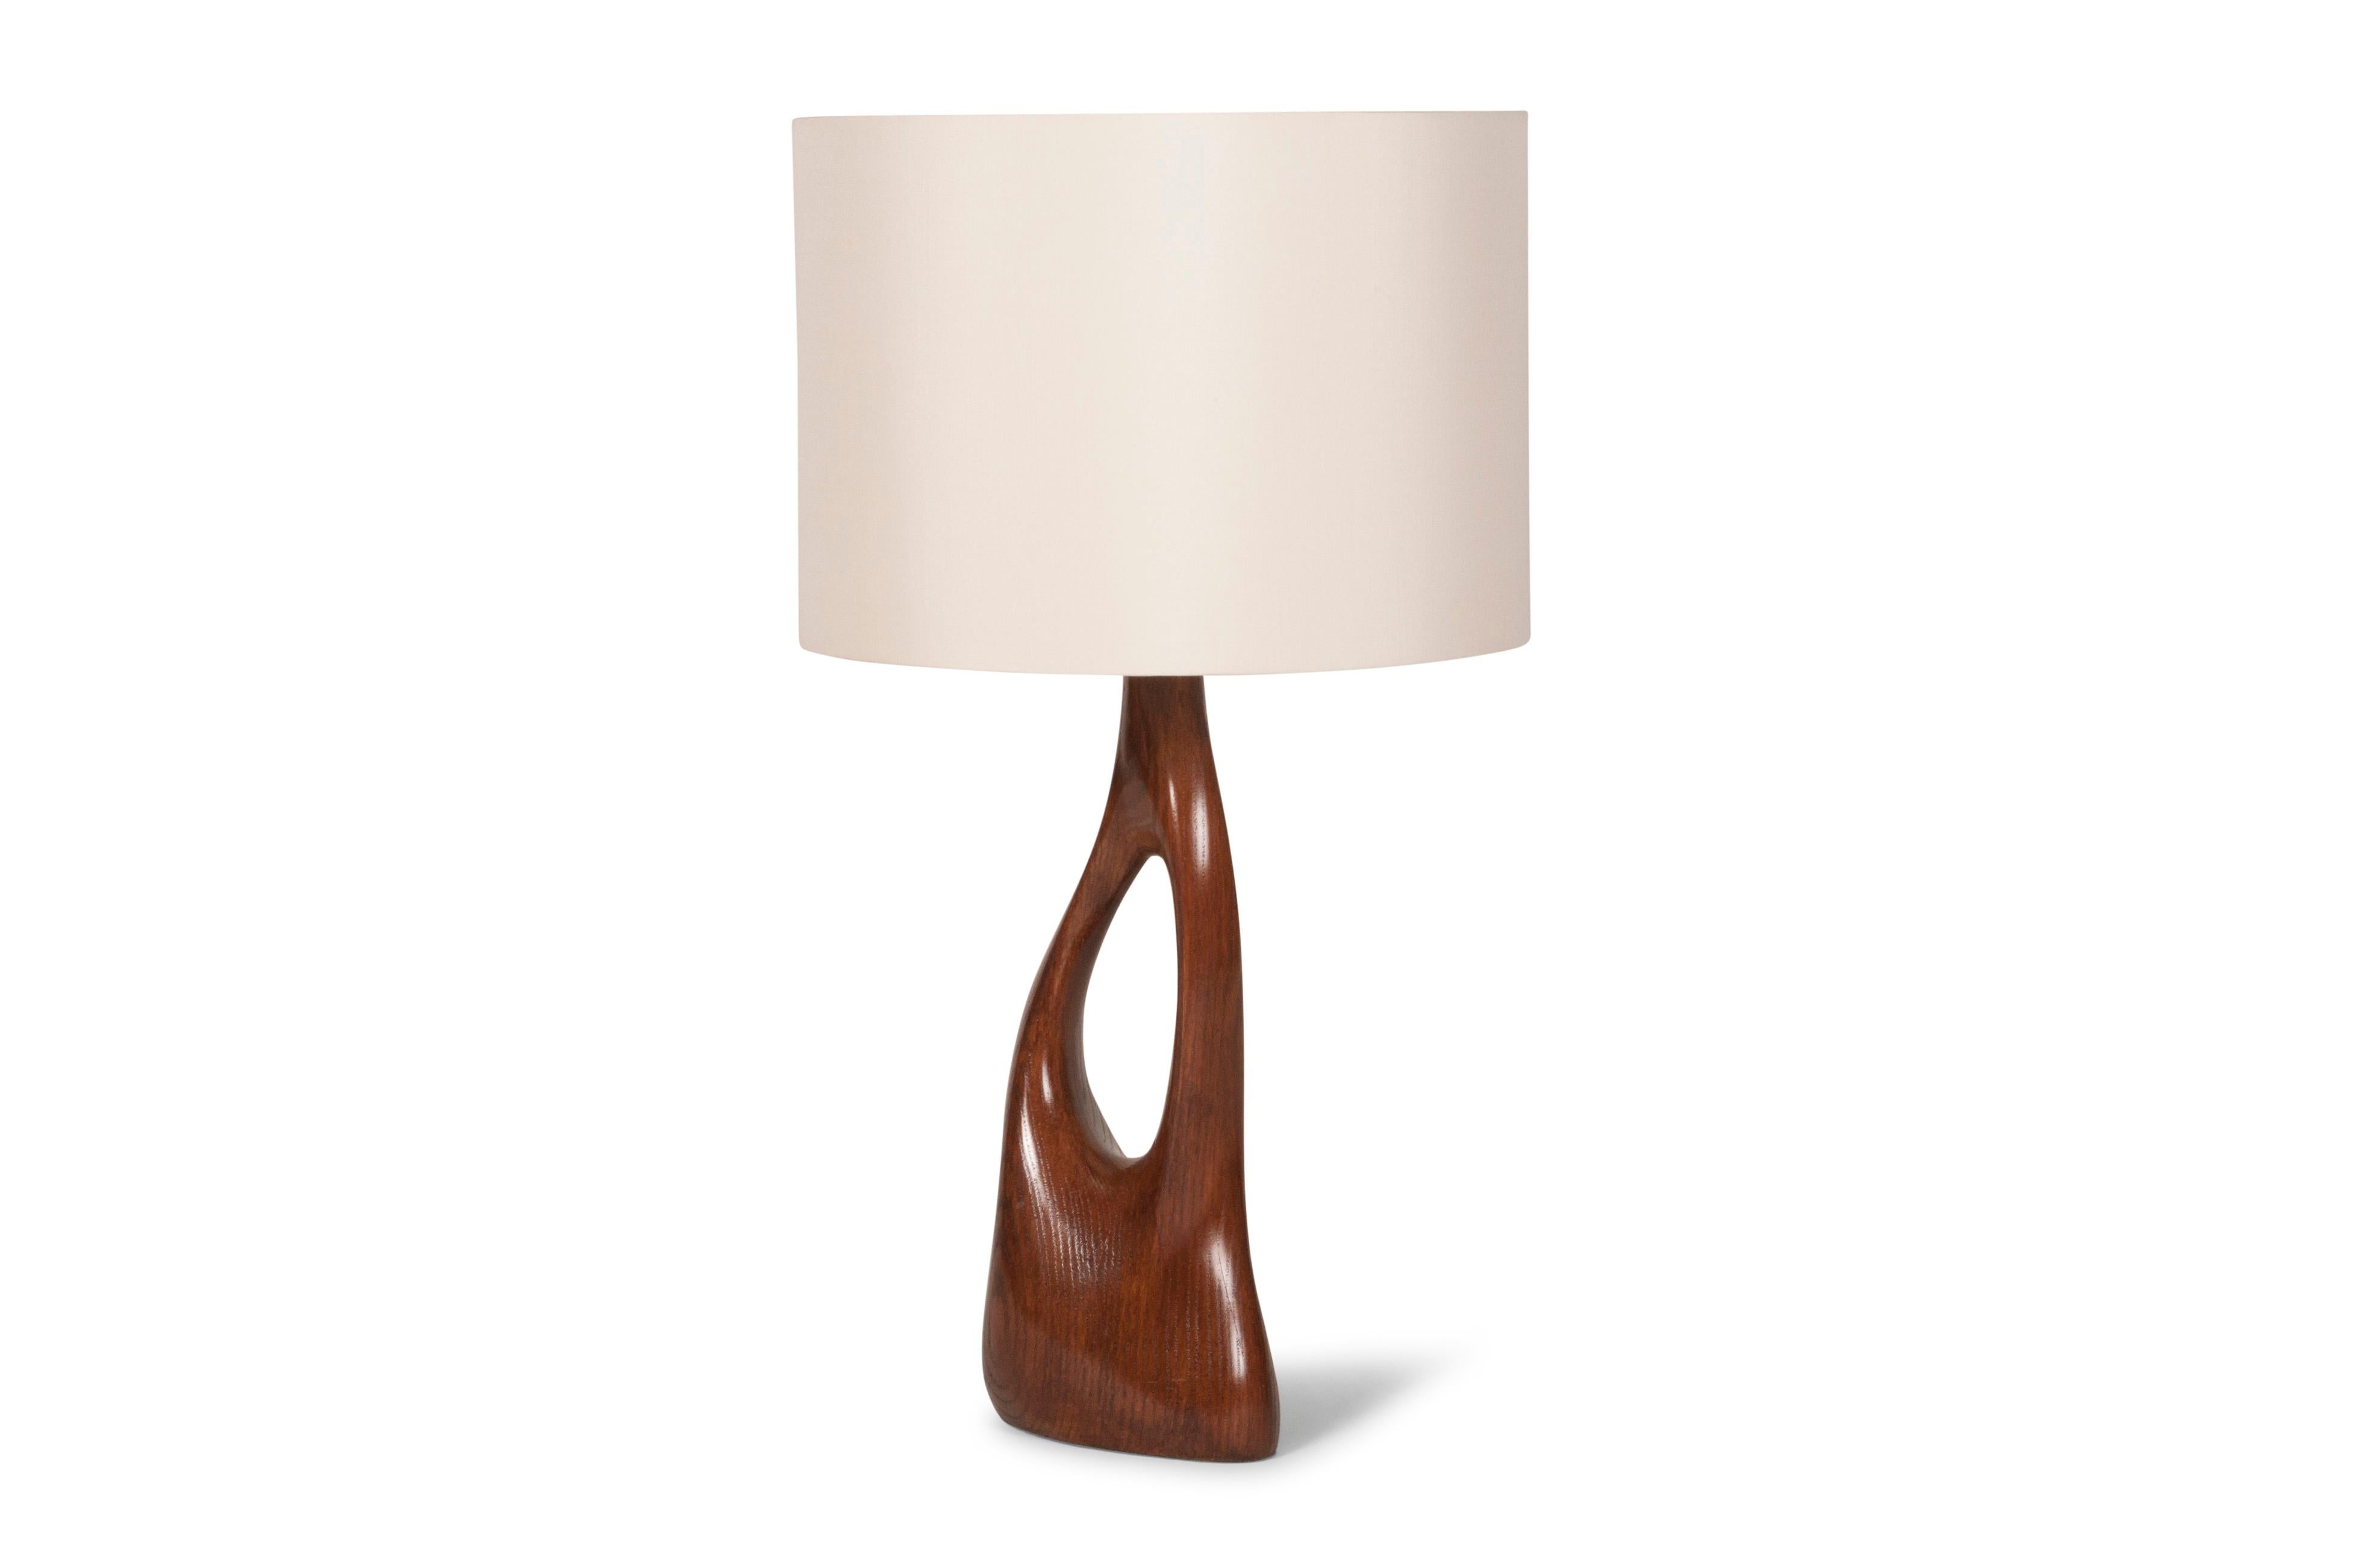 Organic Modern Amorph Helix Table Lamp, Solid wood, Walnut Finish with Ivory Silk Shade For Sale